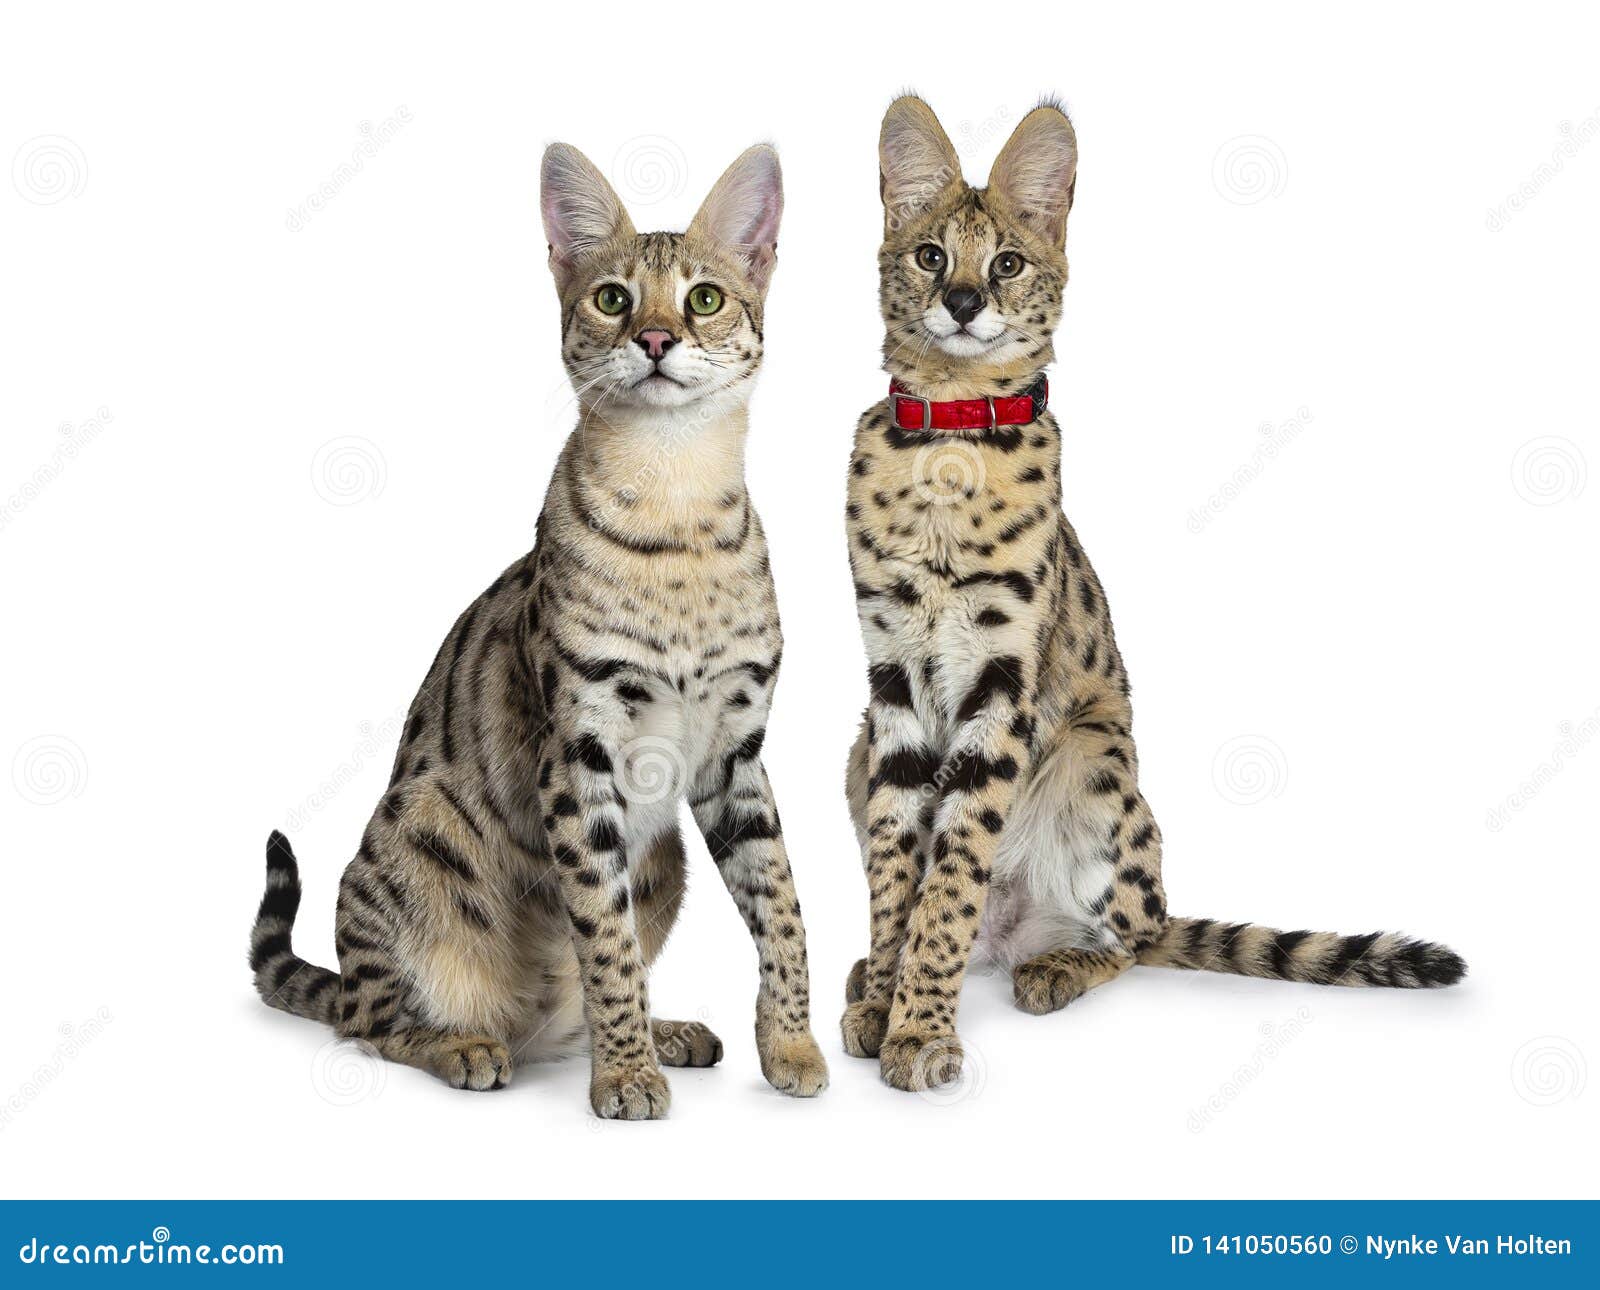 cool young adult savannah f1 cat and serval kitten,  on white background